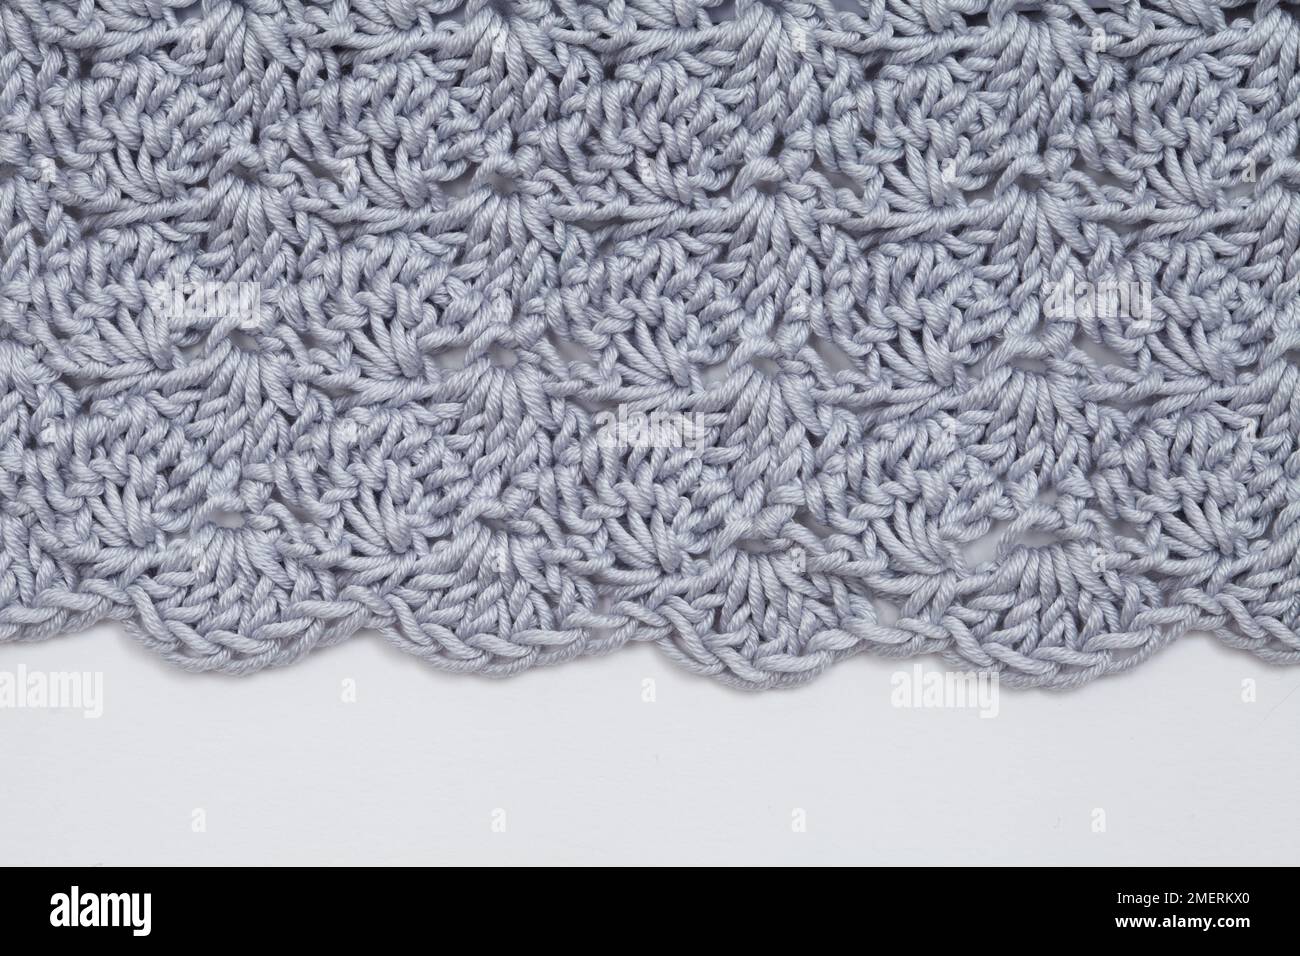 Clutch bag crocheted in cluster and shell stitch pattern, decorative edge detail Stock Photo